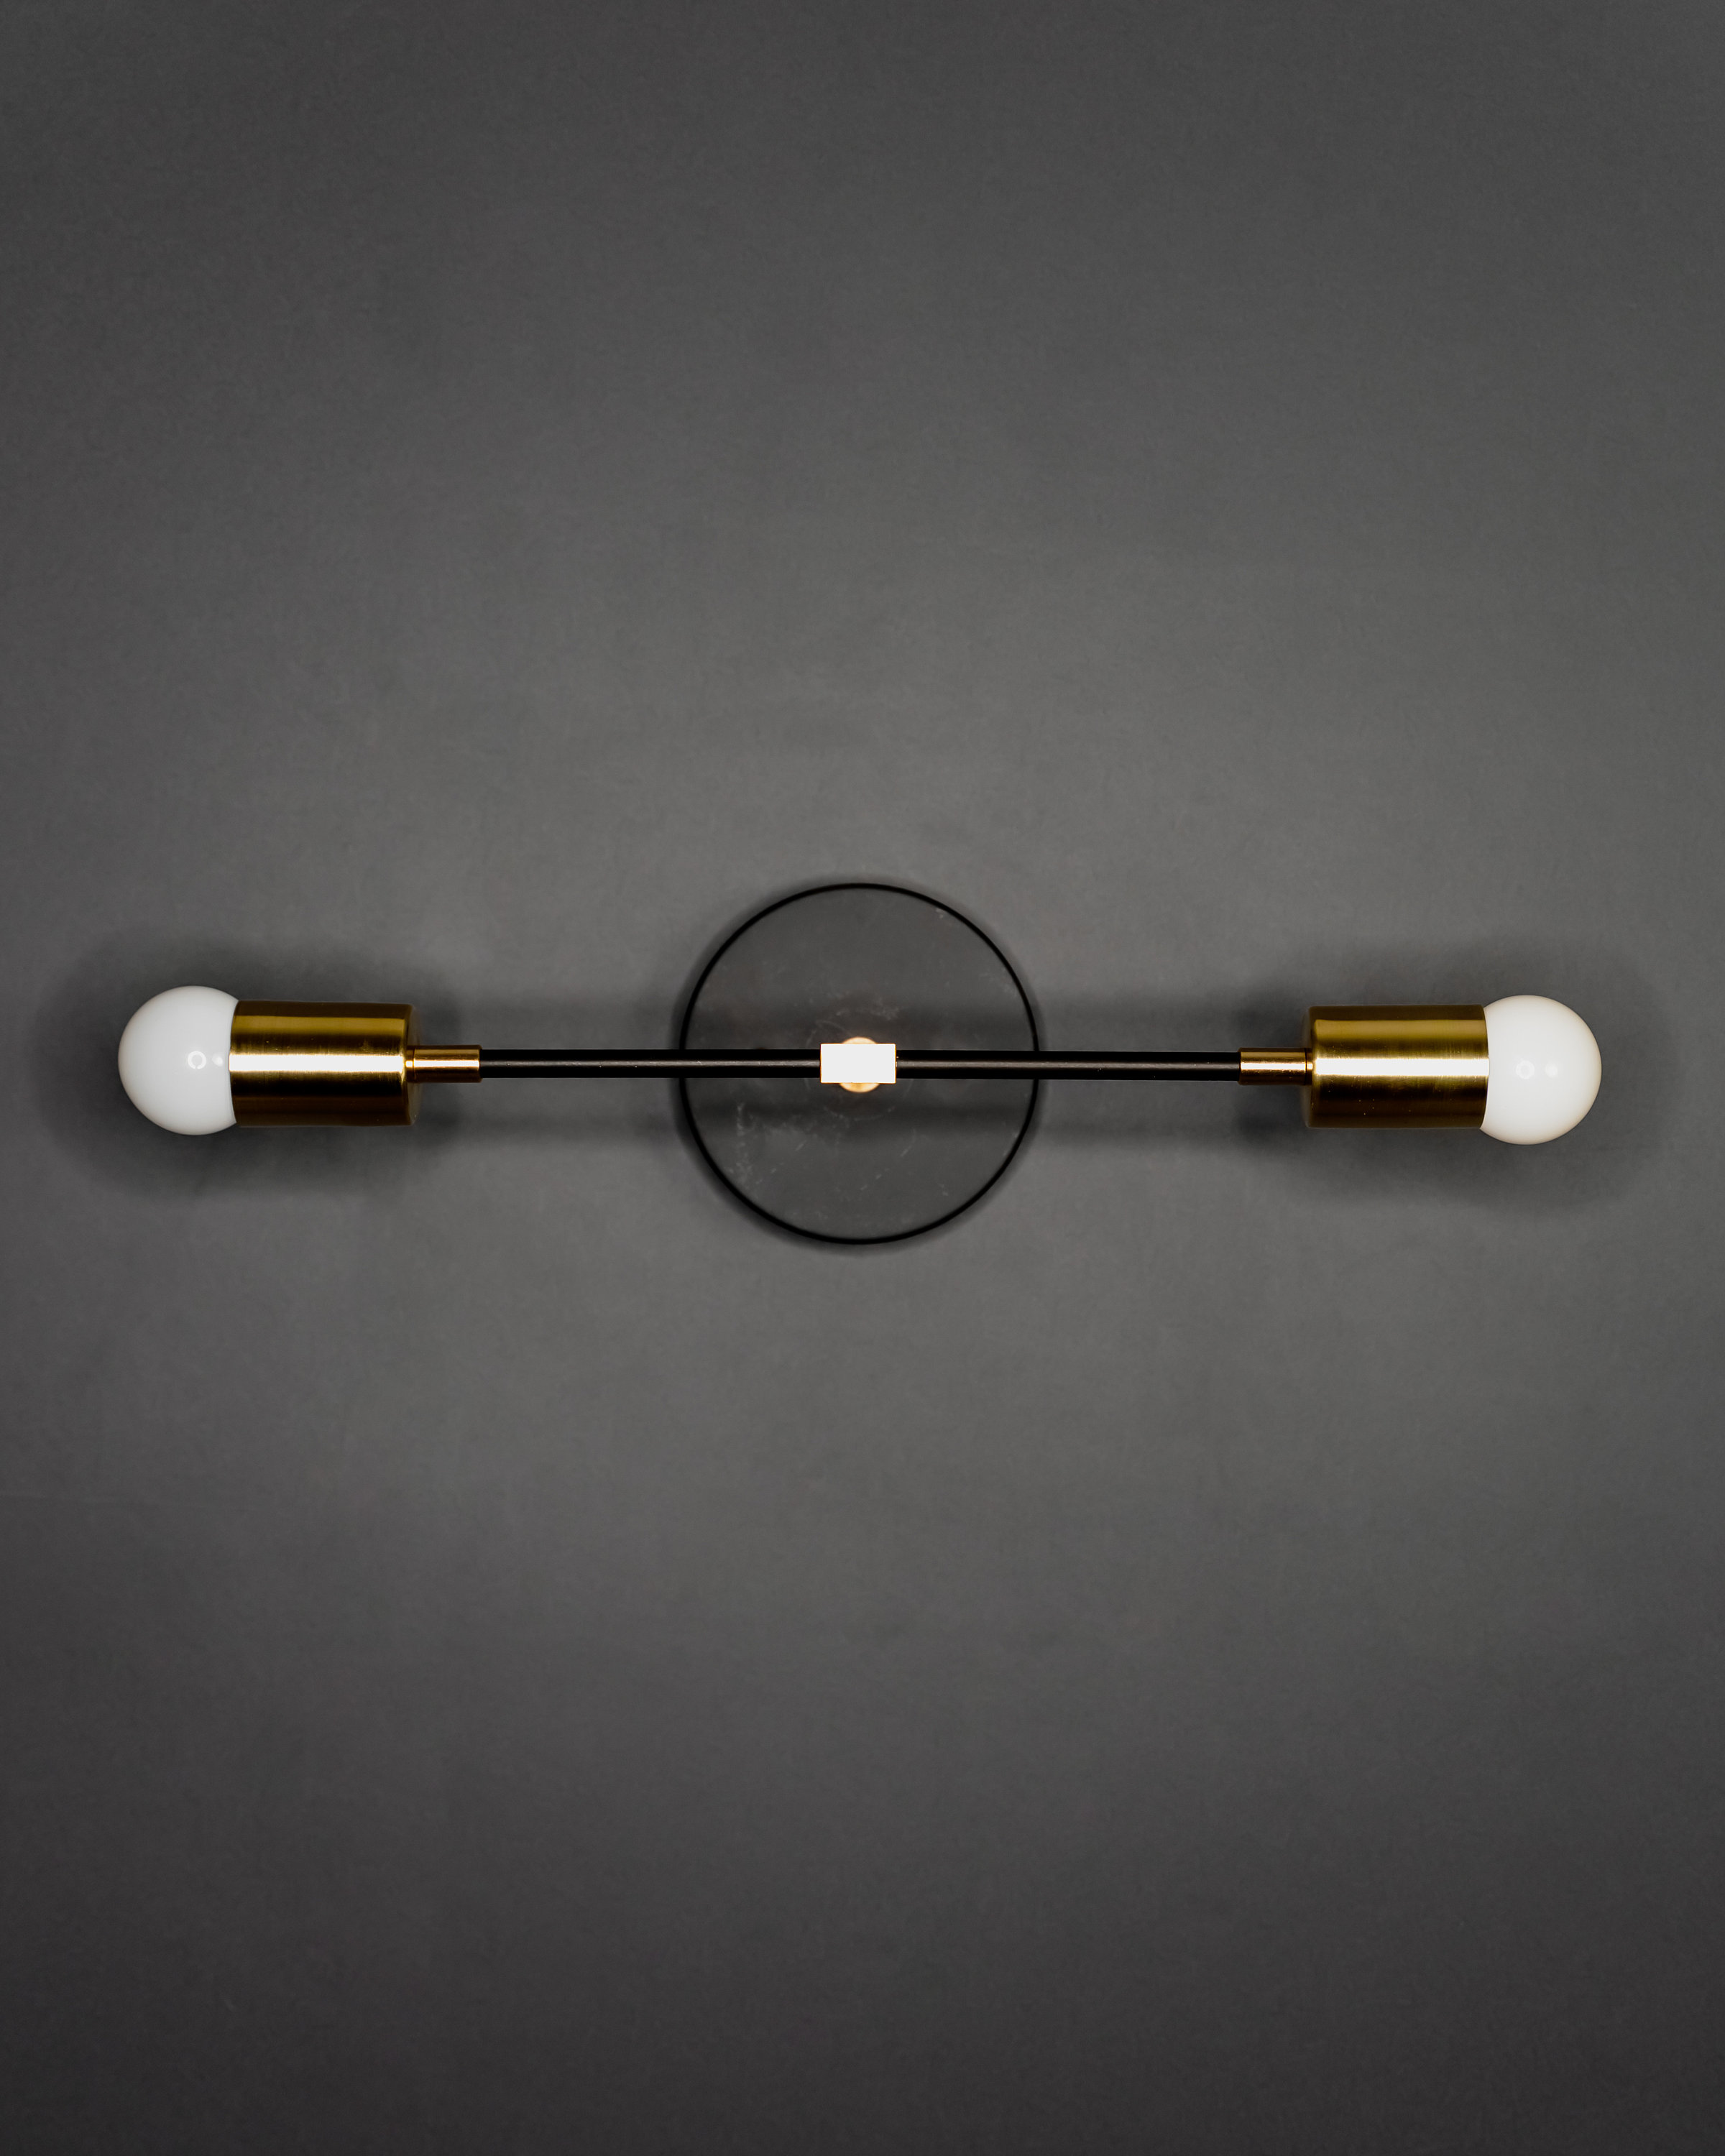 Eunoia Modern Double Bulb Vanity Wall Lamp Industrial Art Sconce In stock Ships on the same day